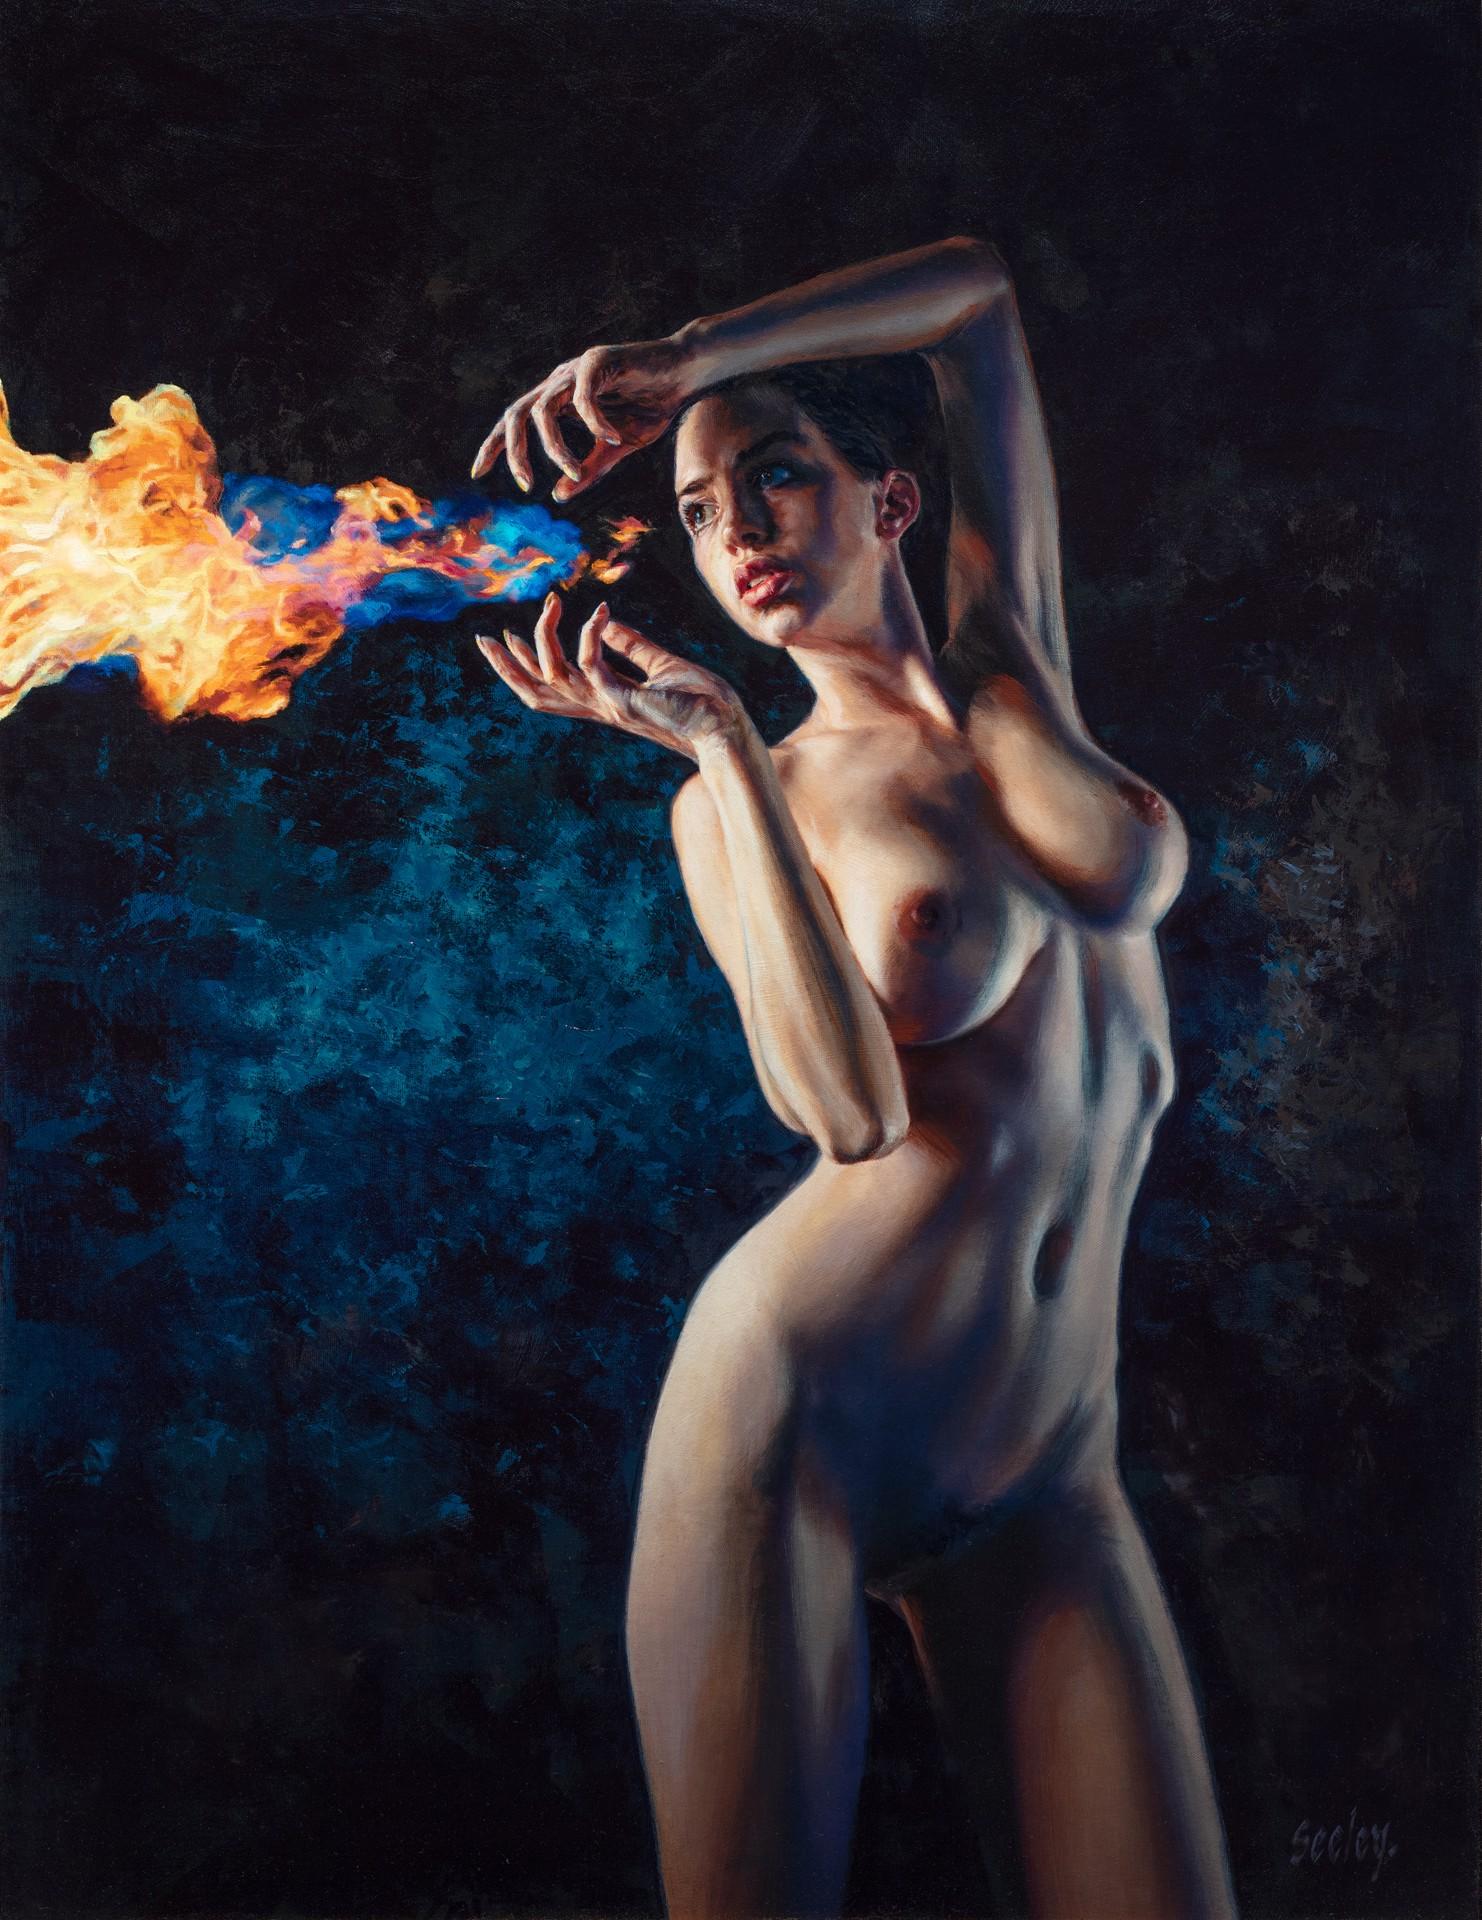 Dave Seeley Nude Painting - "Elemental Fire Starter" – Nude Figure Oil Painting Artistry